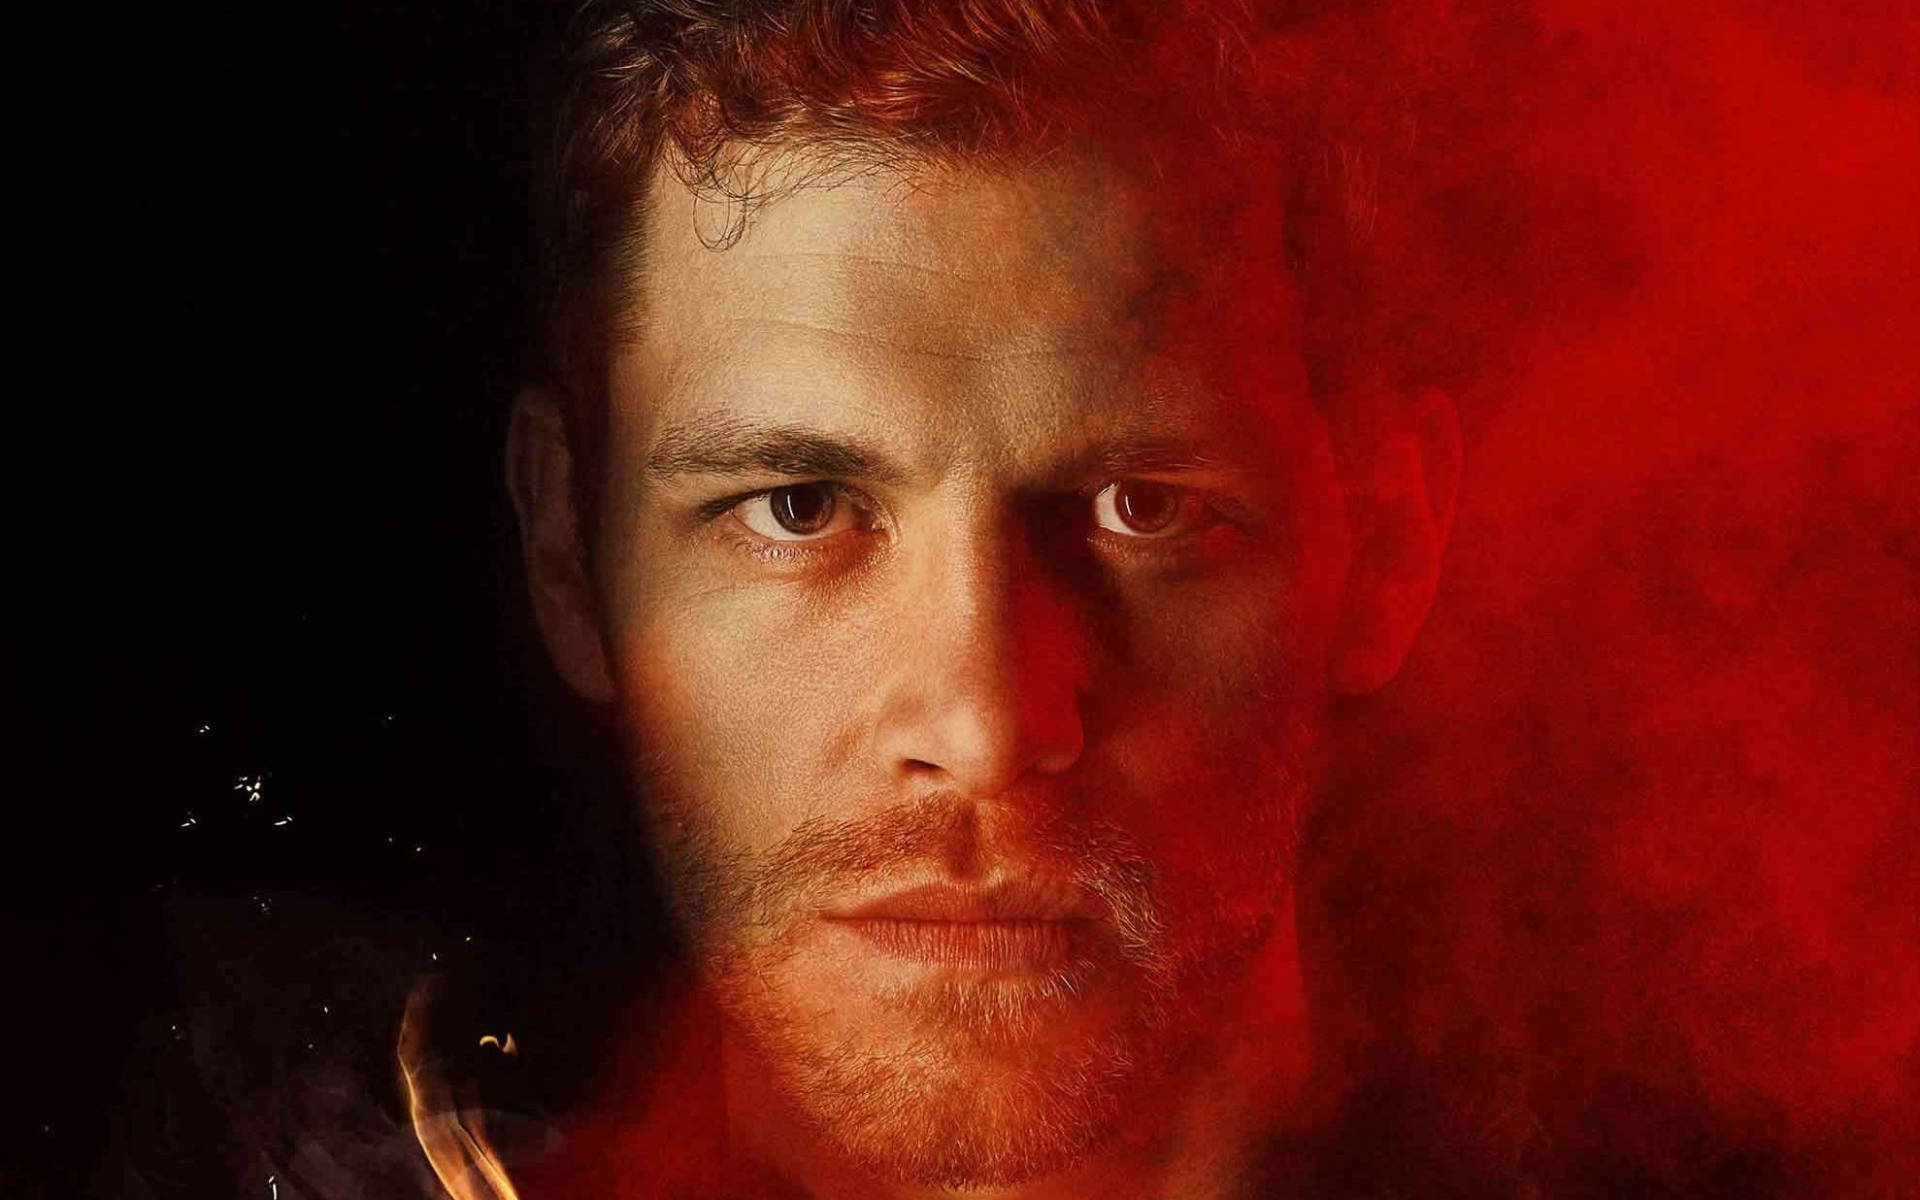 Download The Originals Niklaus Mikaelson Close-up Wallpaper 